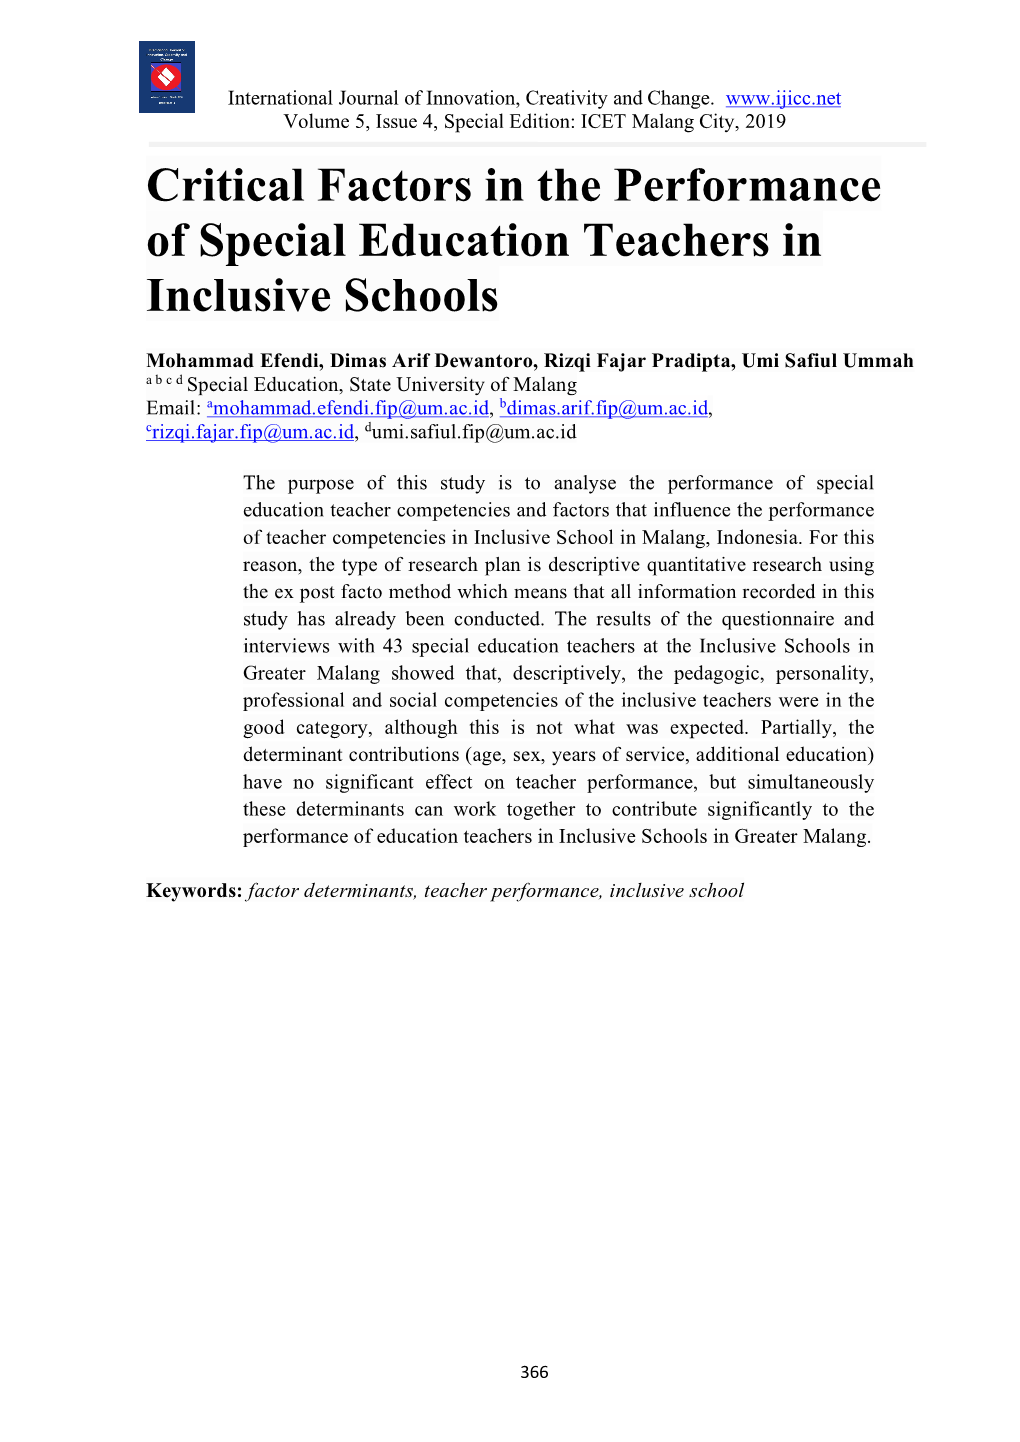 Critical Factors in the Performance of Special Education Teachers in Inclusive Schools